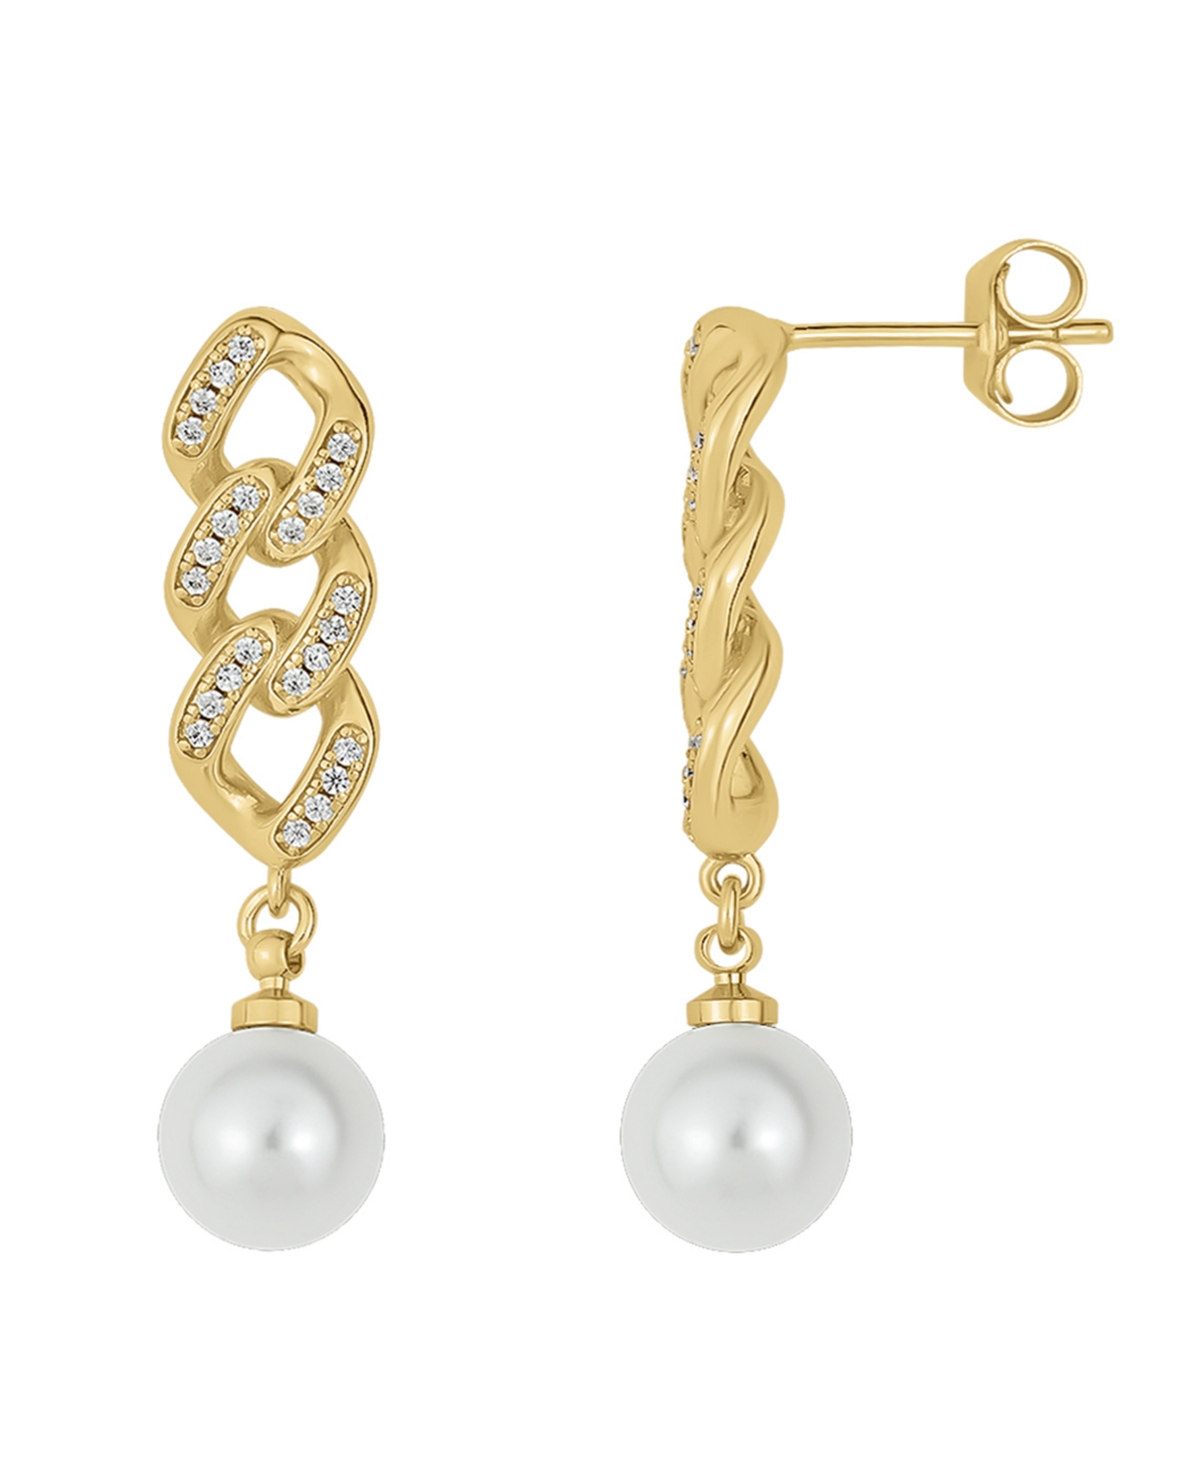 And Now This Cubic Zirconia Simulated Imitation Pearl 18k Gold Plated Drop Earring In K Gold Plated Over Brass